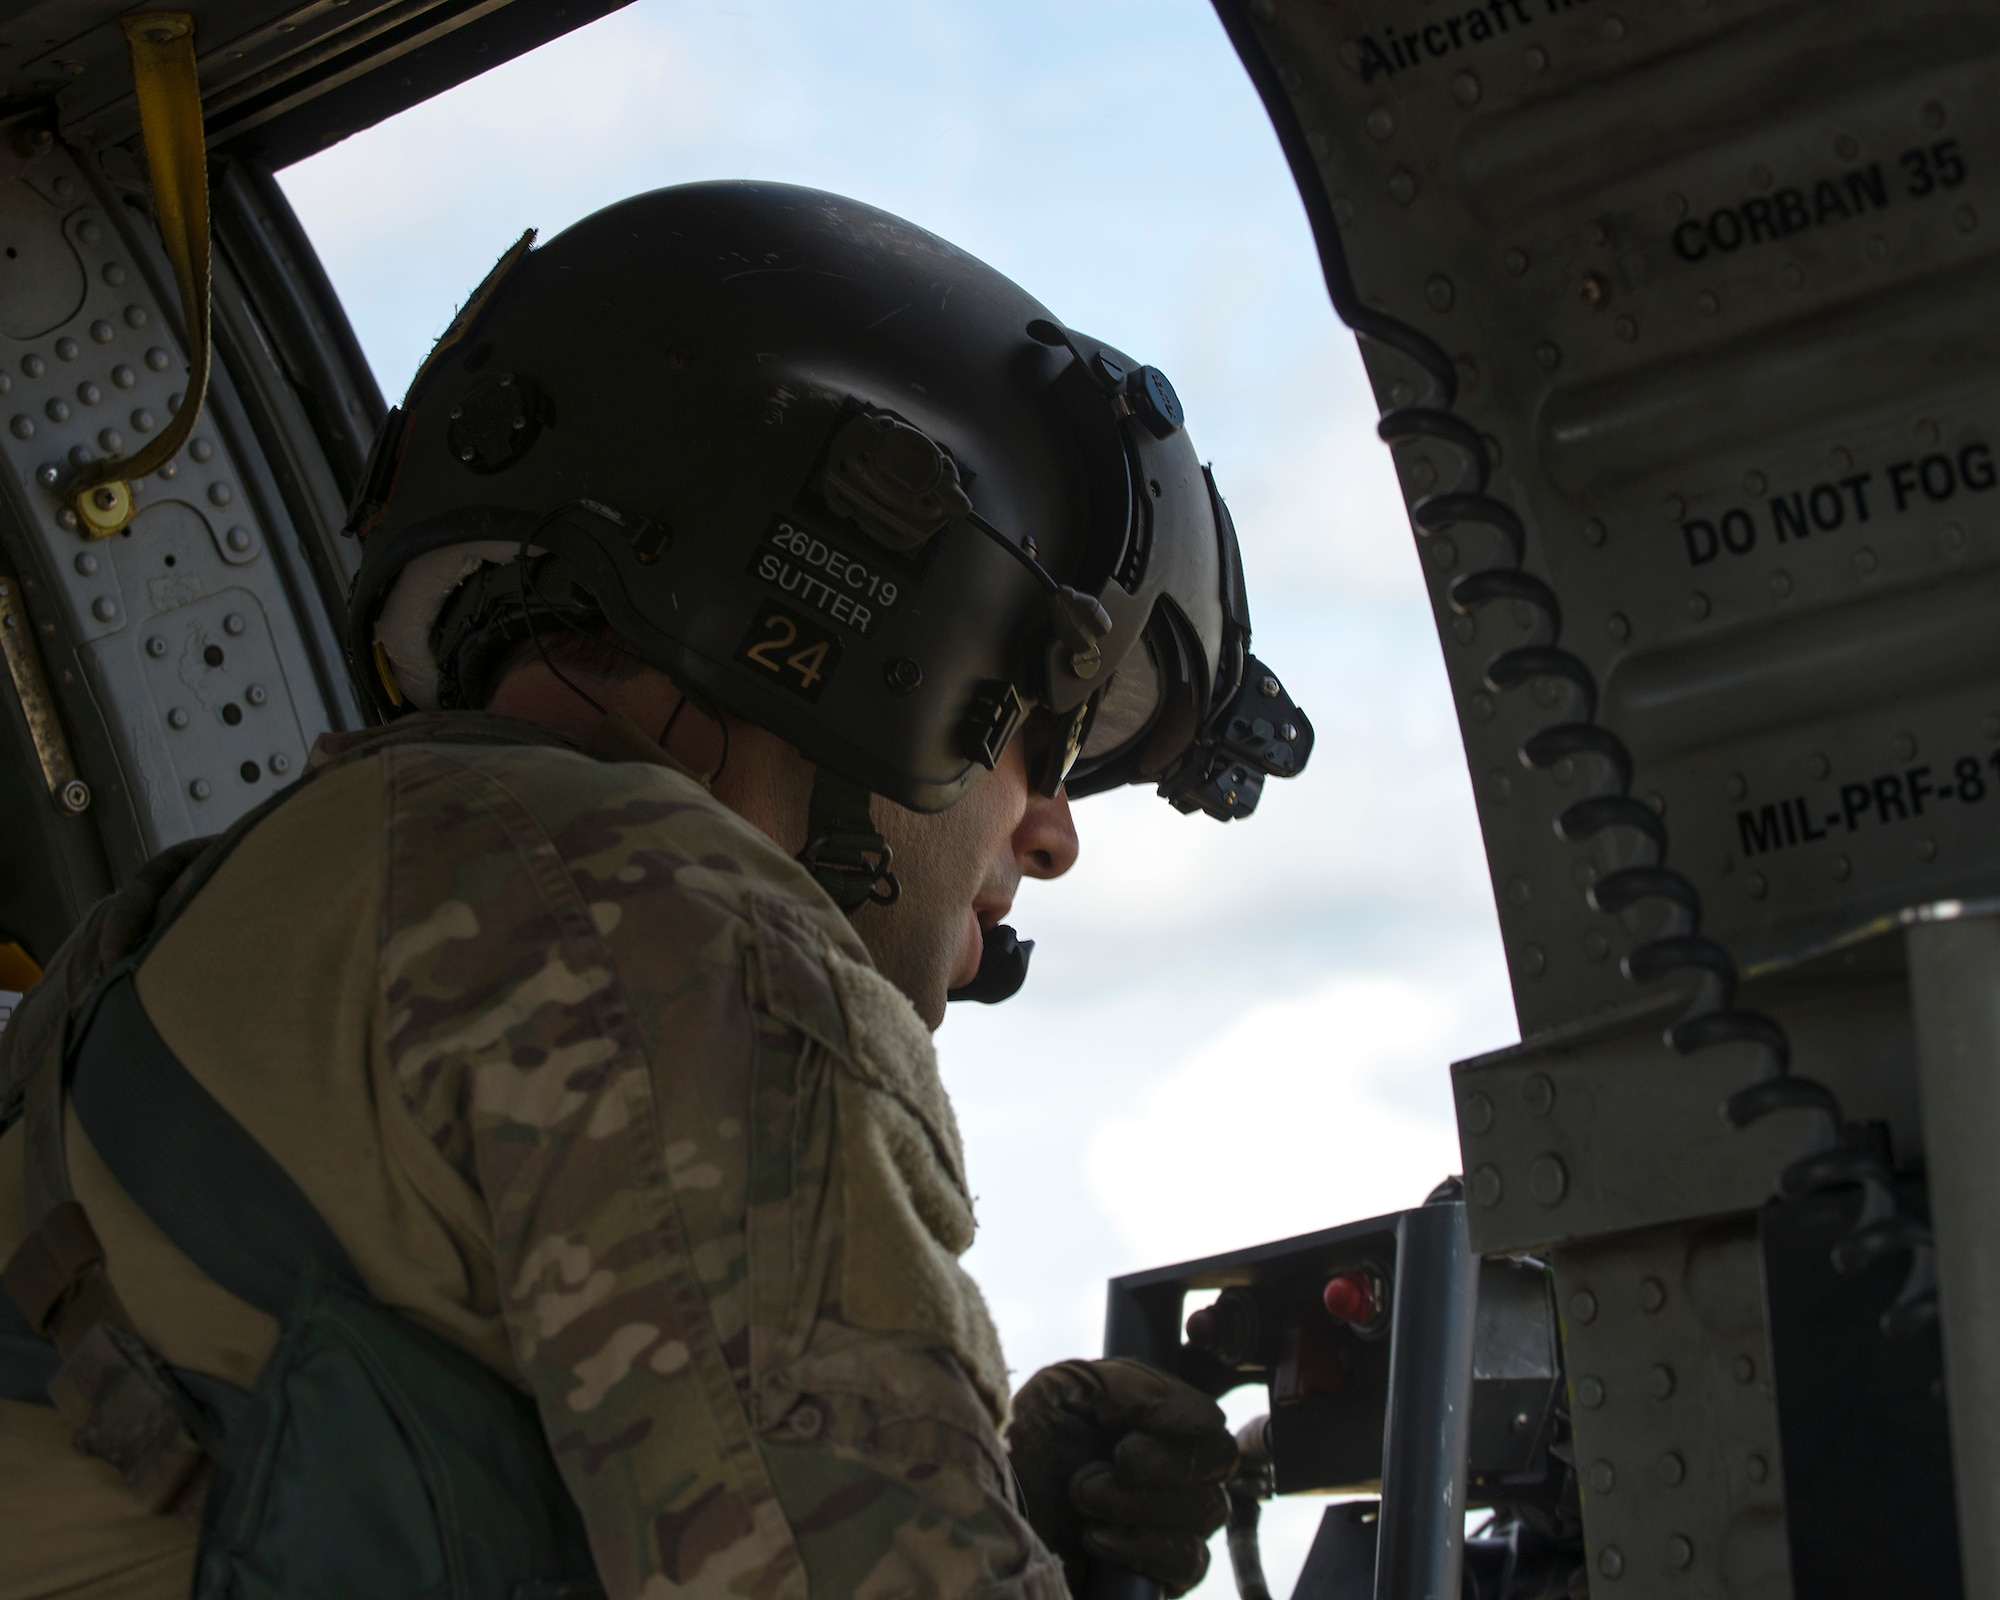 U.S. Air Force Reserve Master Sgt. Jeremy Sutter, a special missions aviator assigned to the 305th Rescue Squadron (RQS), Davis-Monthan Air Force Base, Ariz., operates an HH-60 Pave Hawk helicopter’s .50-caliber weapon over Avon Park Air Force Range, Fla., Nov. 8, 2019.